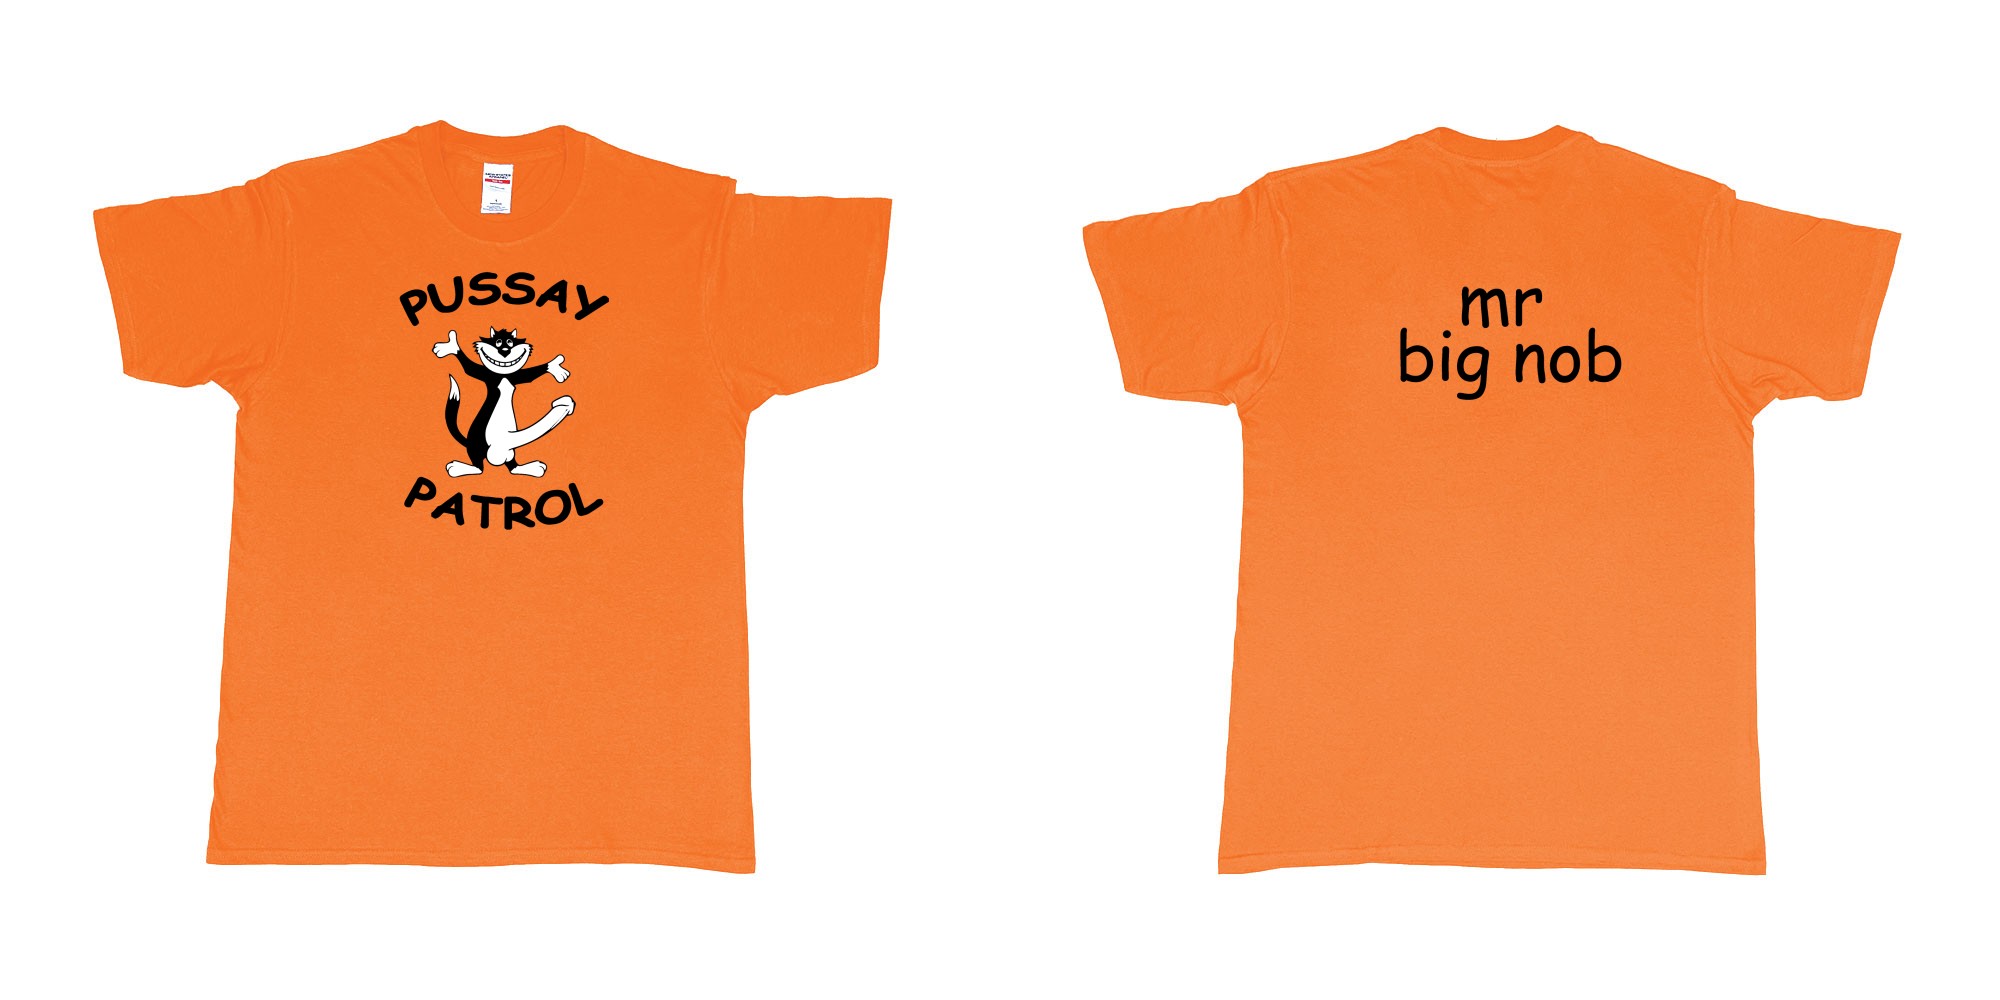 Custom tshirt design TPW Pussay Patrol in fabric color orange choice your own text made in Bali by The Pirate Way